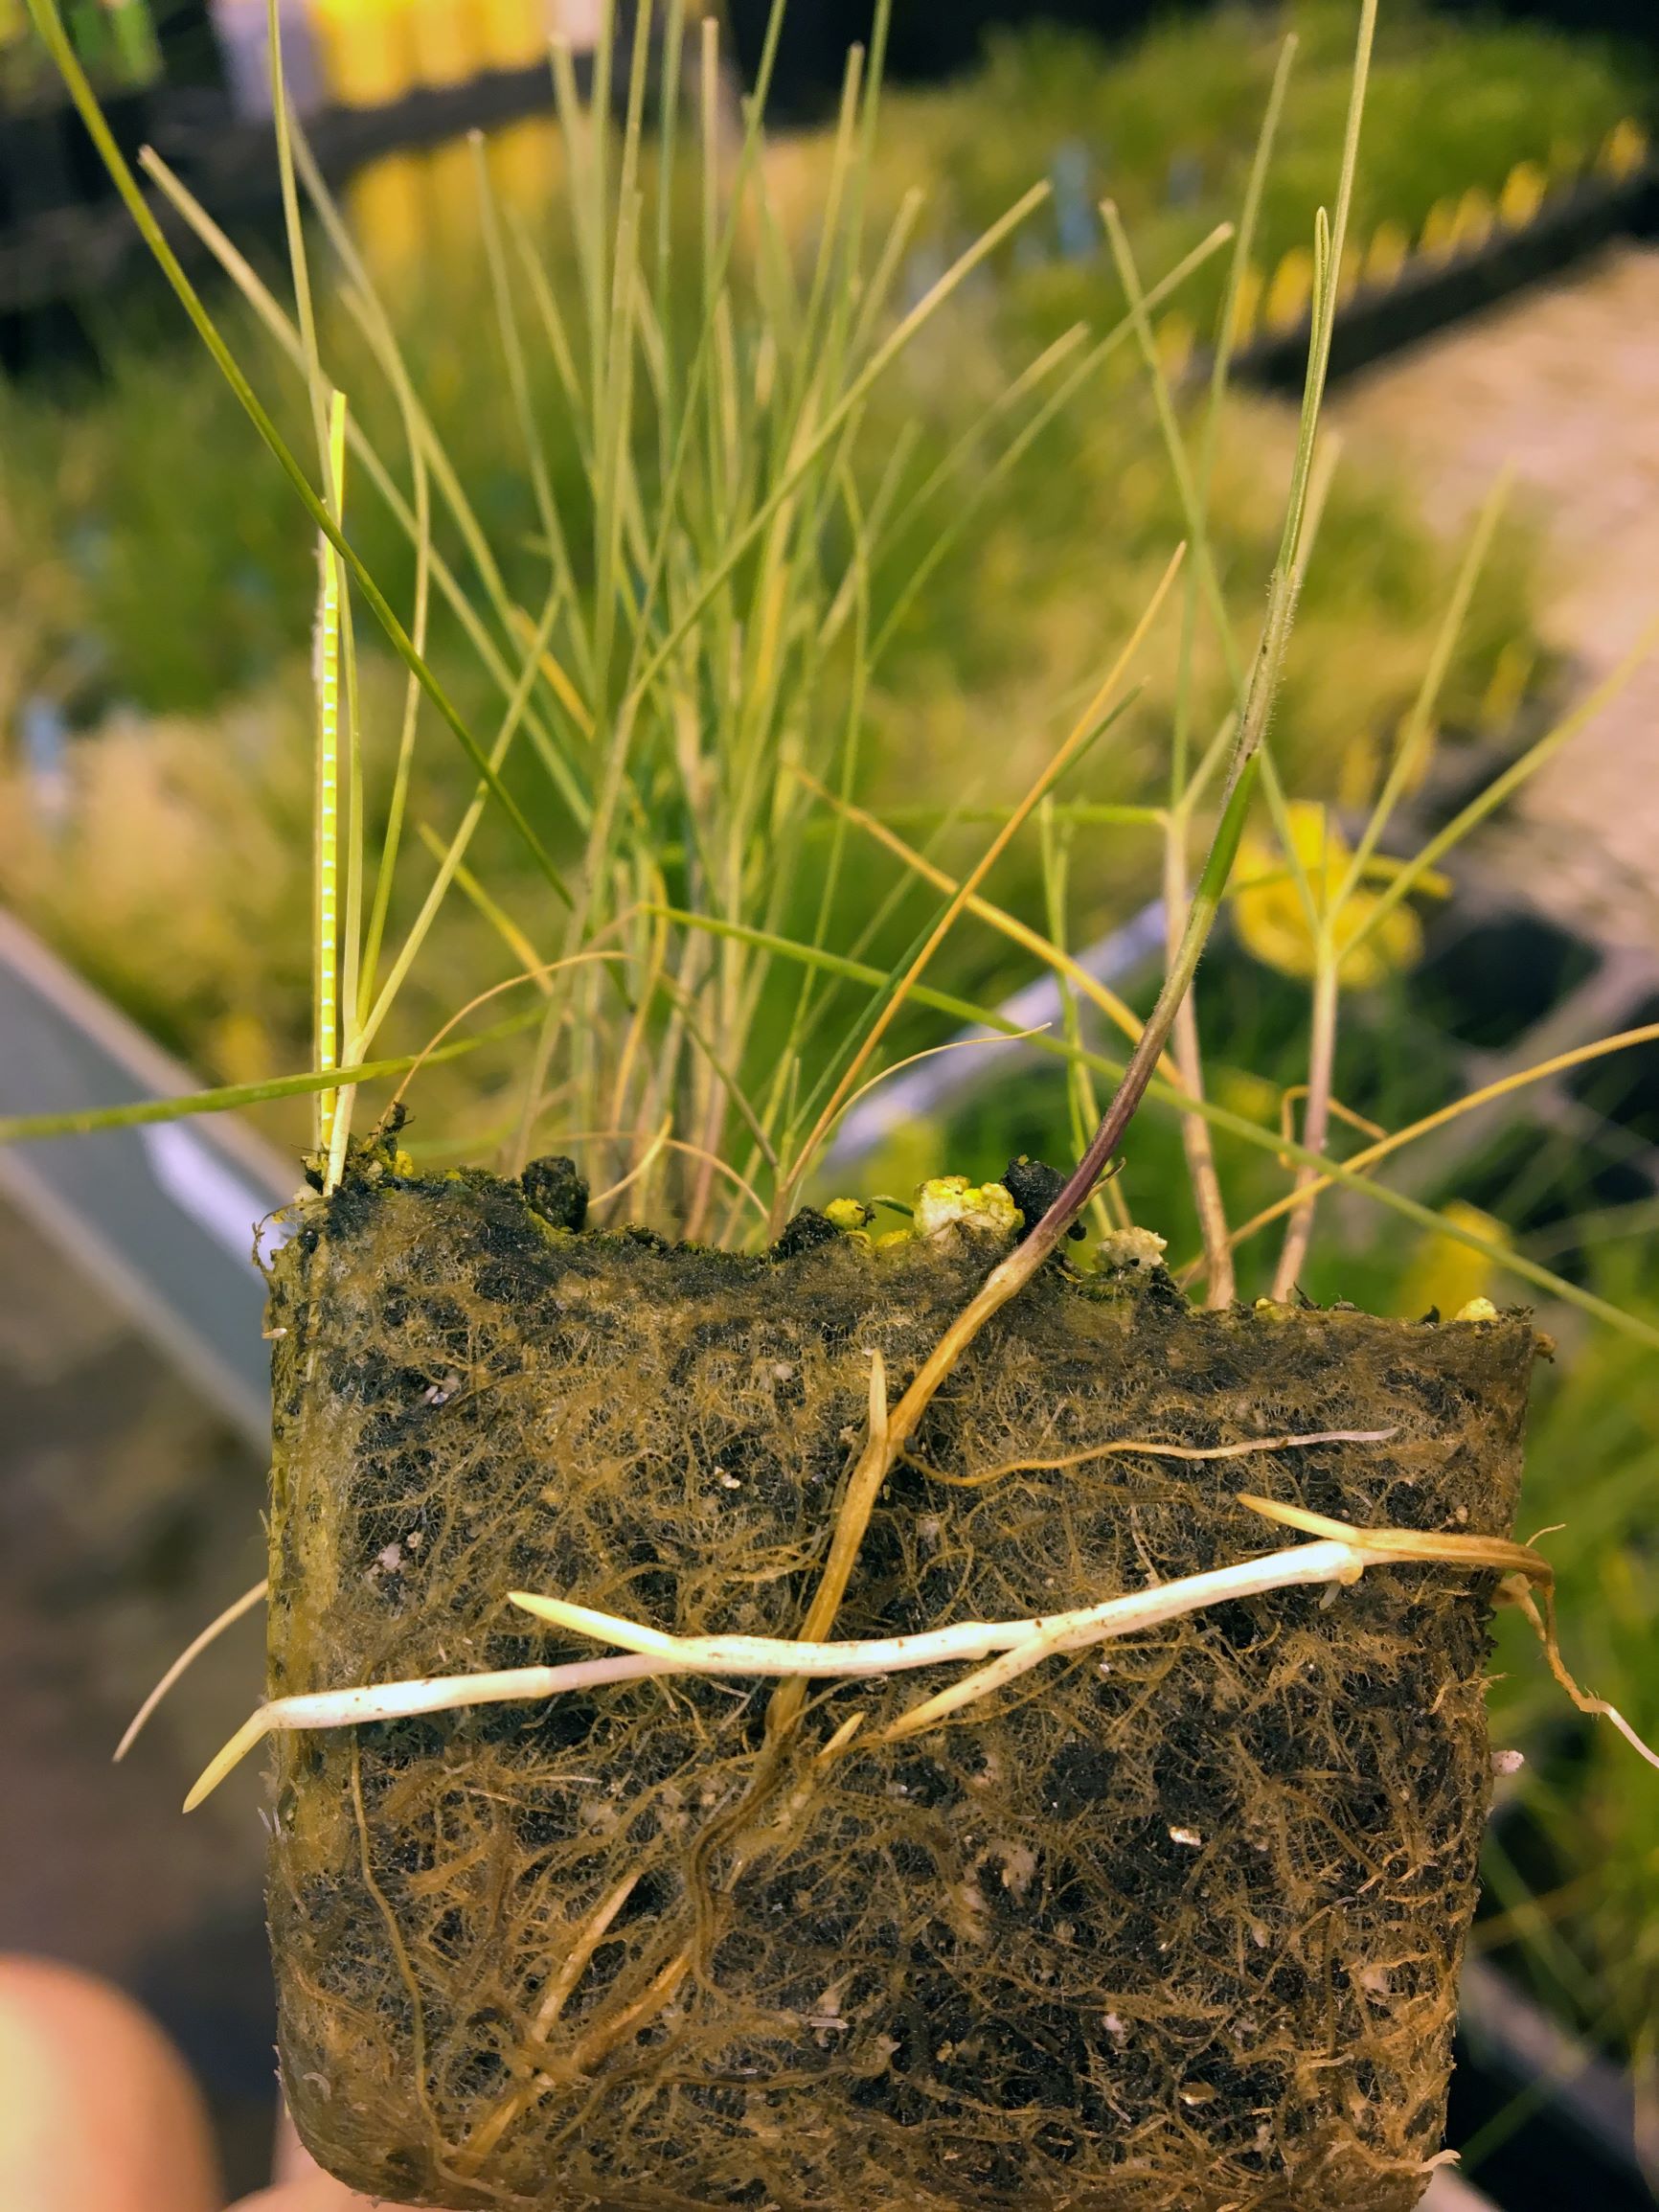 profile of soil and turfgrass with a white rhizome growing horizontally